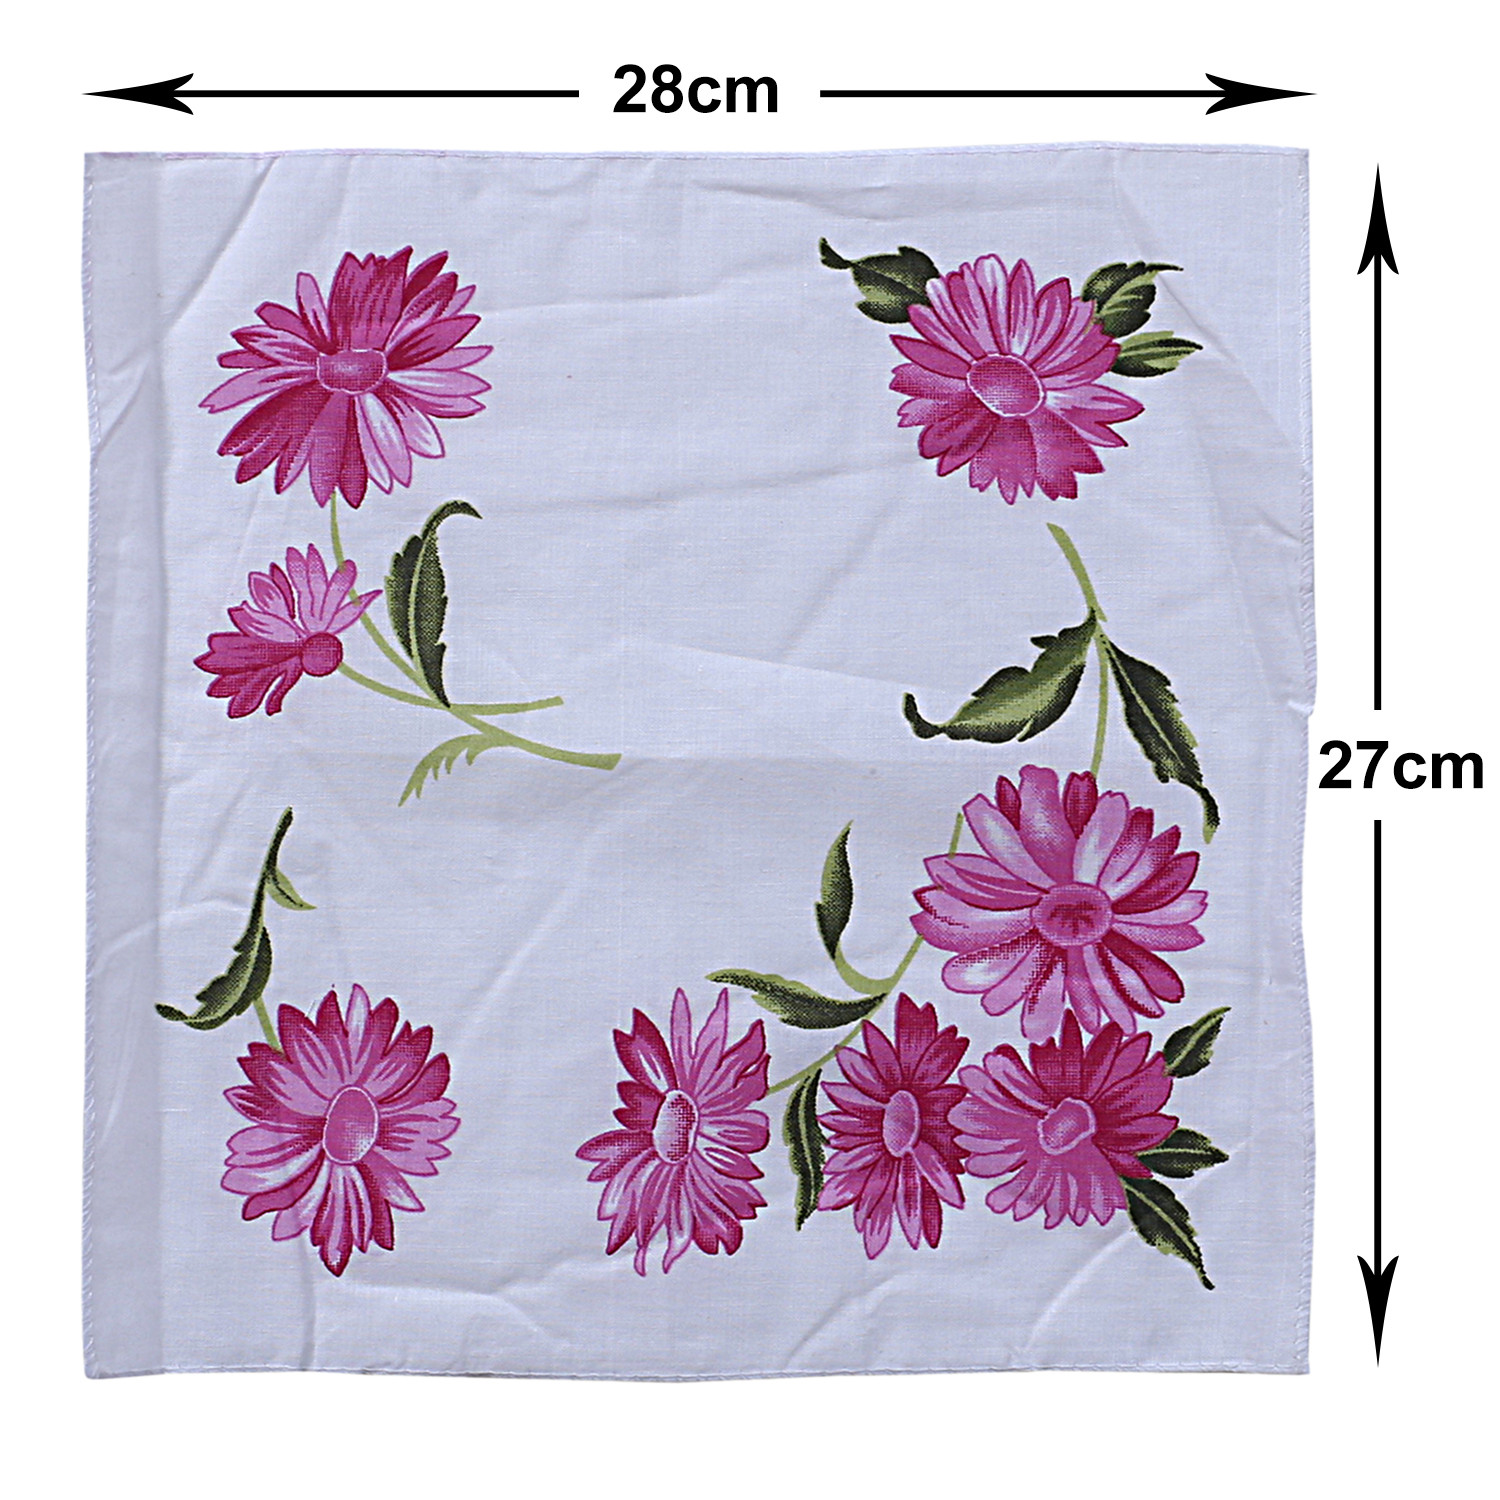 Kuber Industries Handkerchiefs|Soft Cotton Multicolored Sun Flower Print Hankies For Woman,Girls & Wicking Sweat from Hands,Face,Set of 12 (White)